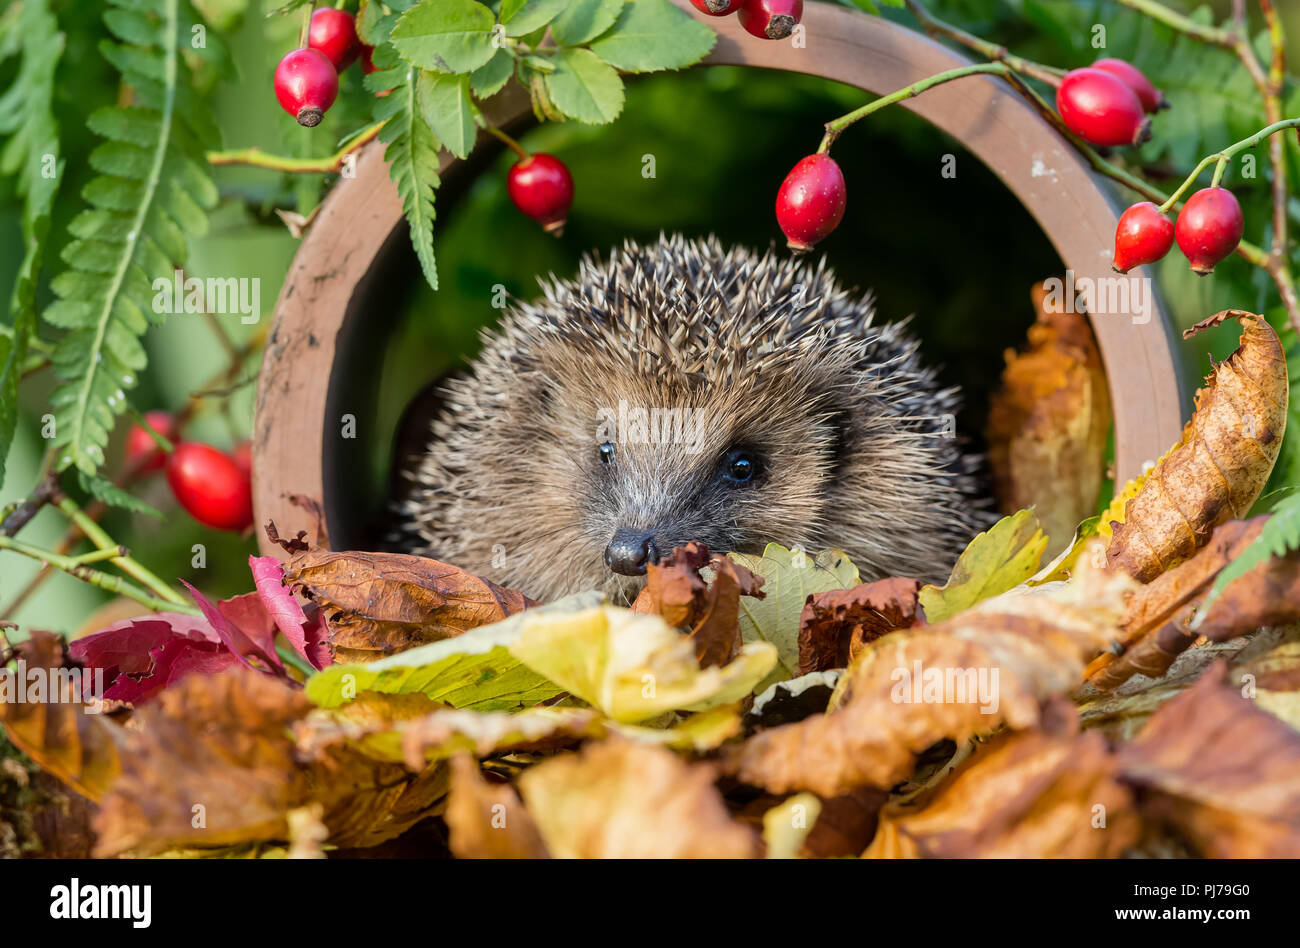 Hedgehog, wild, native, European hedgehog in Autumn with bright red rosehips around a clay drainage pipe and golden autumn or Fall leaves.  Landscape Stock Photo